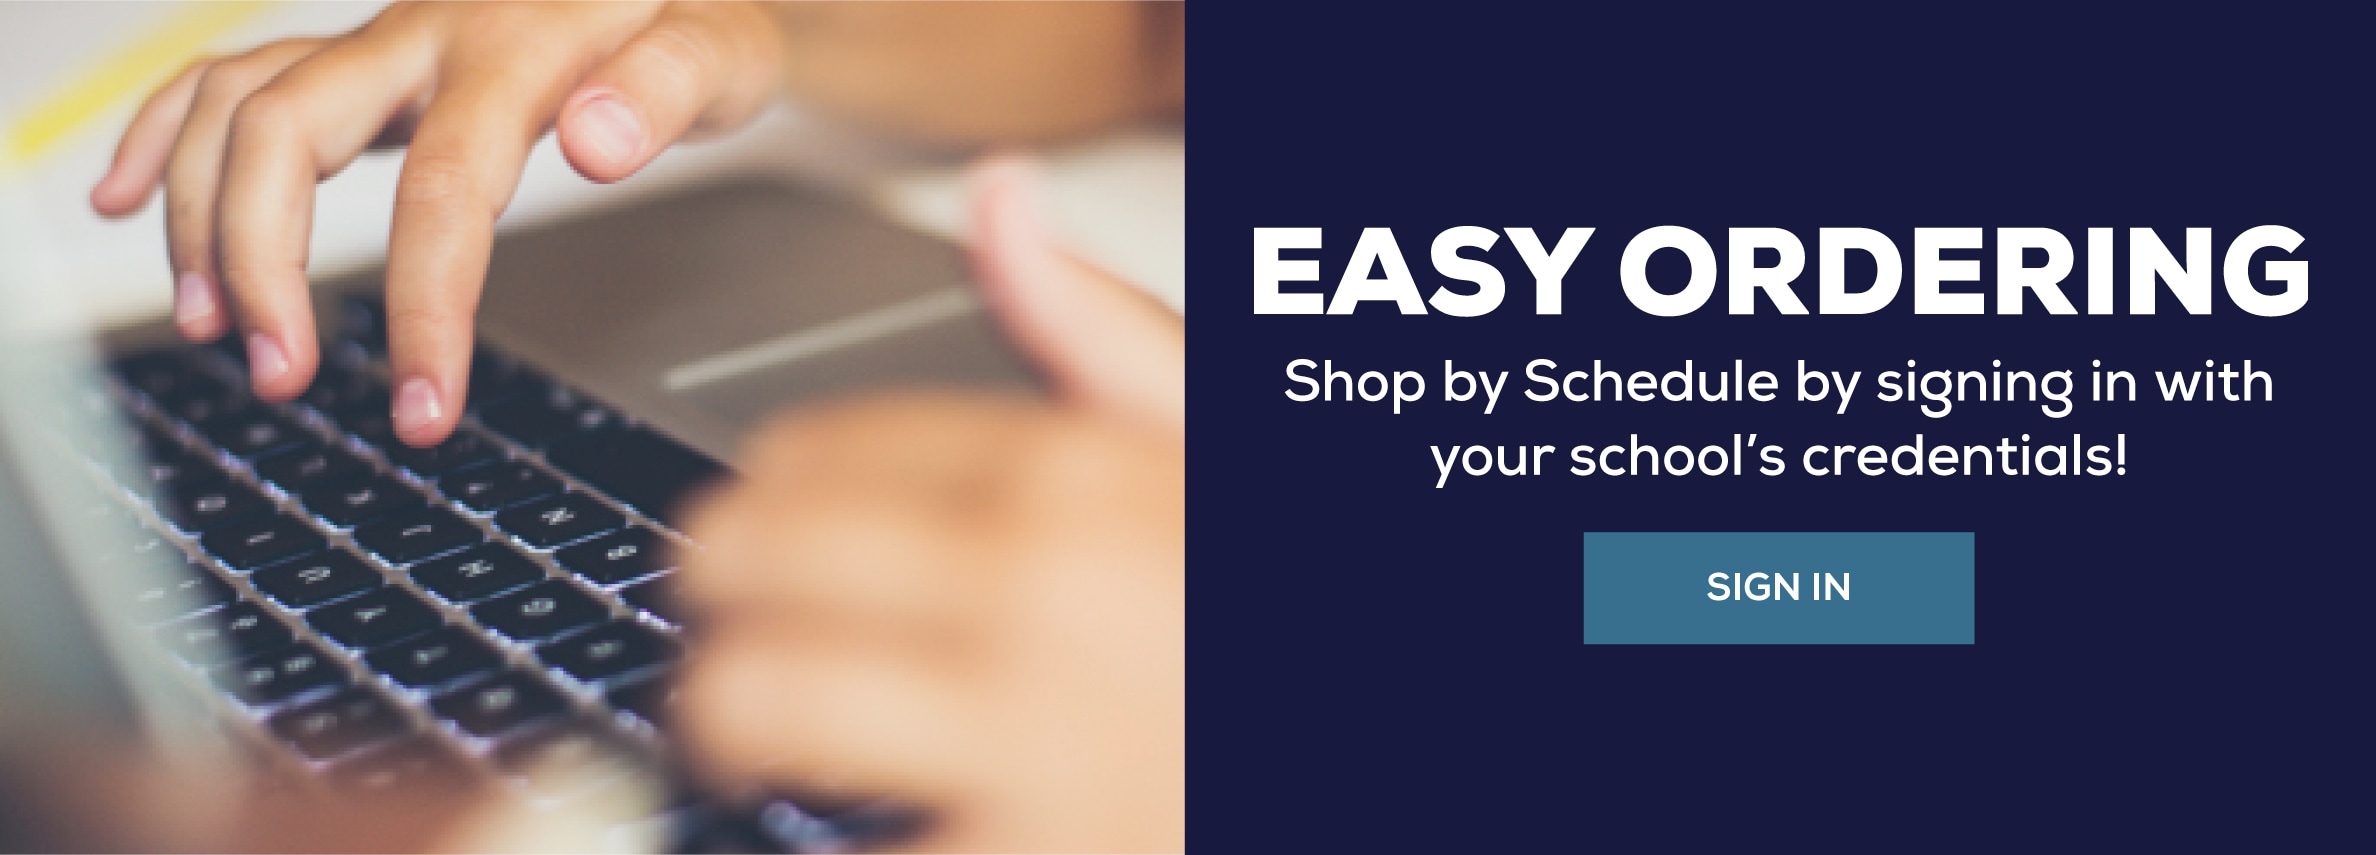 Easy Ordering. Shop by Schedule by signing in with your school's credentials